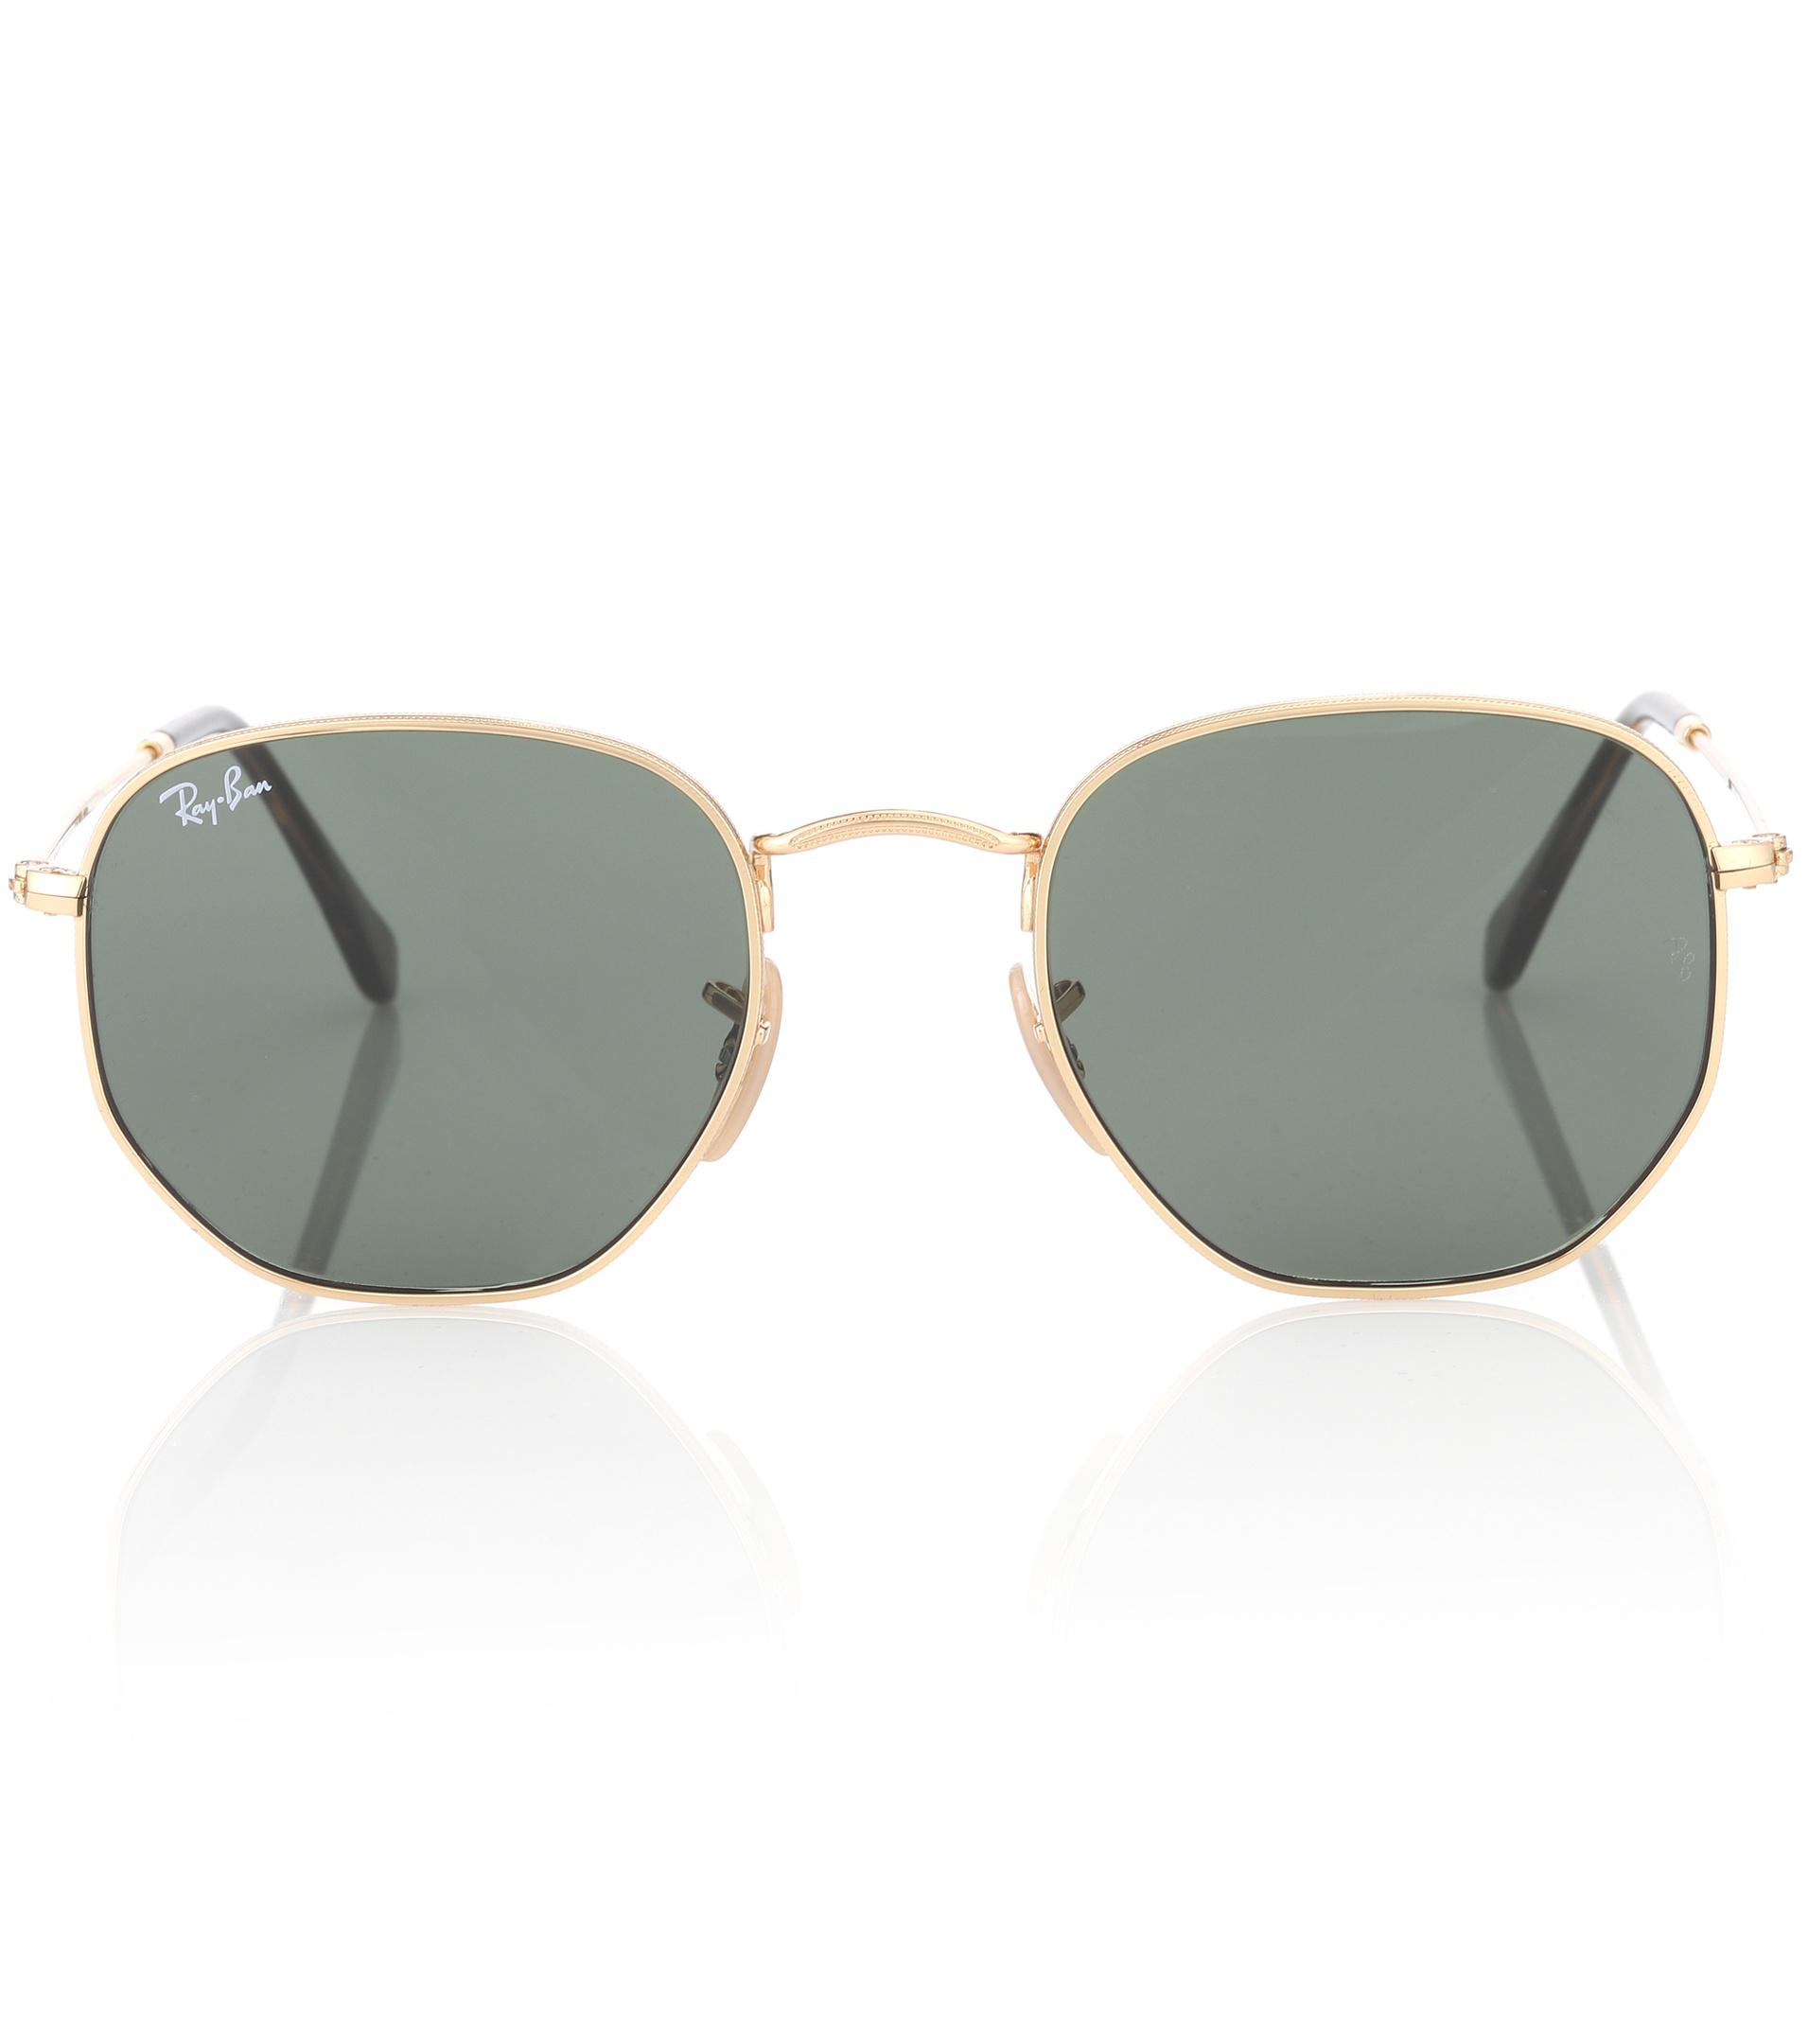 Ray-Ban Synthetic Rb3548n Hexagonal Flat Sunglasses in Green - Lyst